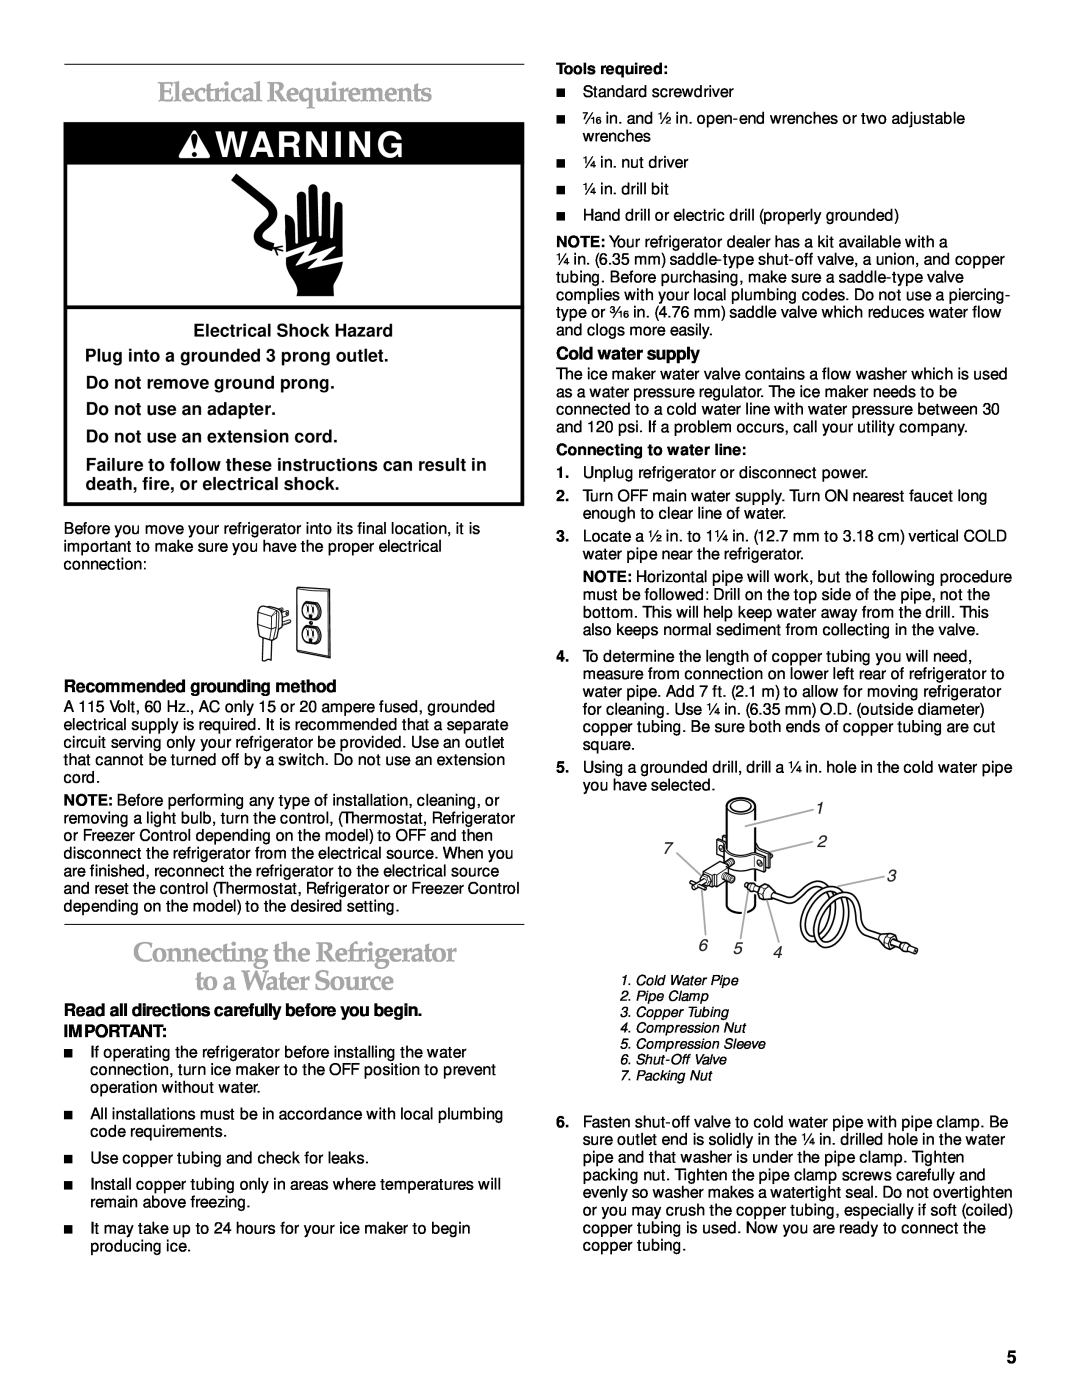 KitchenAid 2205264 Electrical Requirements, Connecting the Refrigerator to a Water Source, Do not use an extension cord 